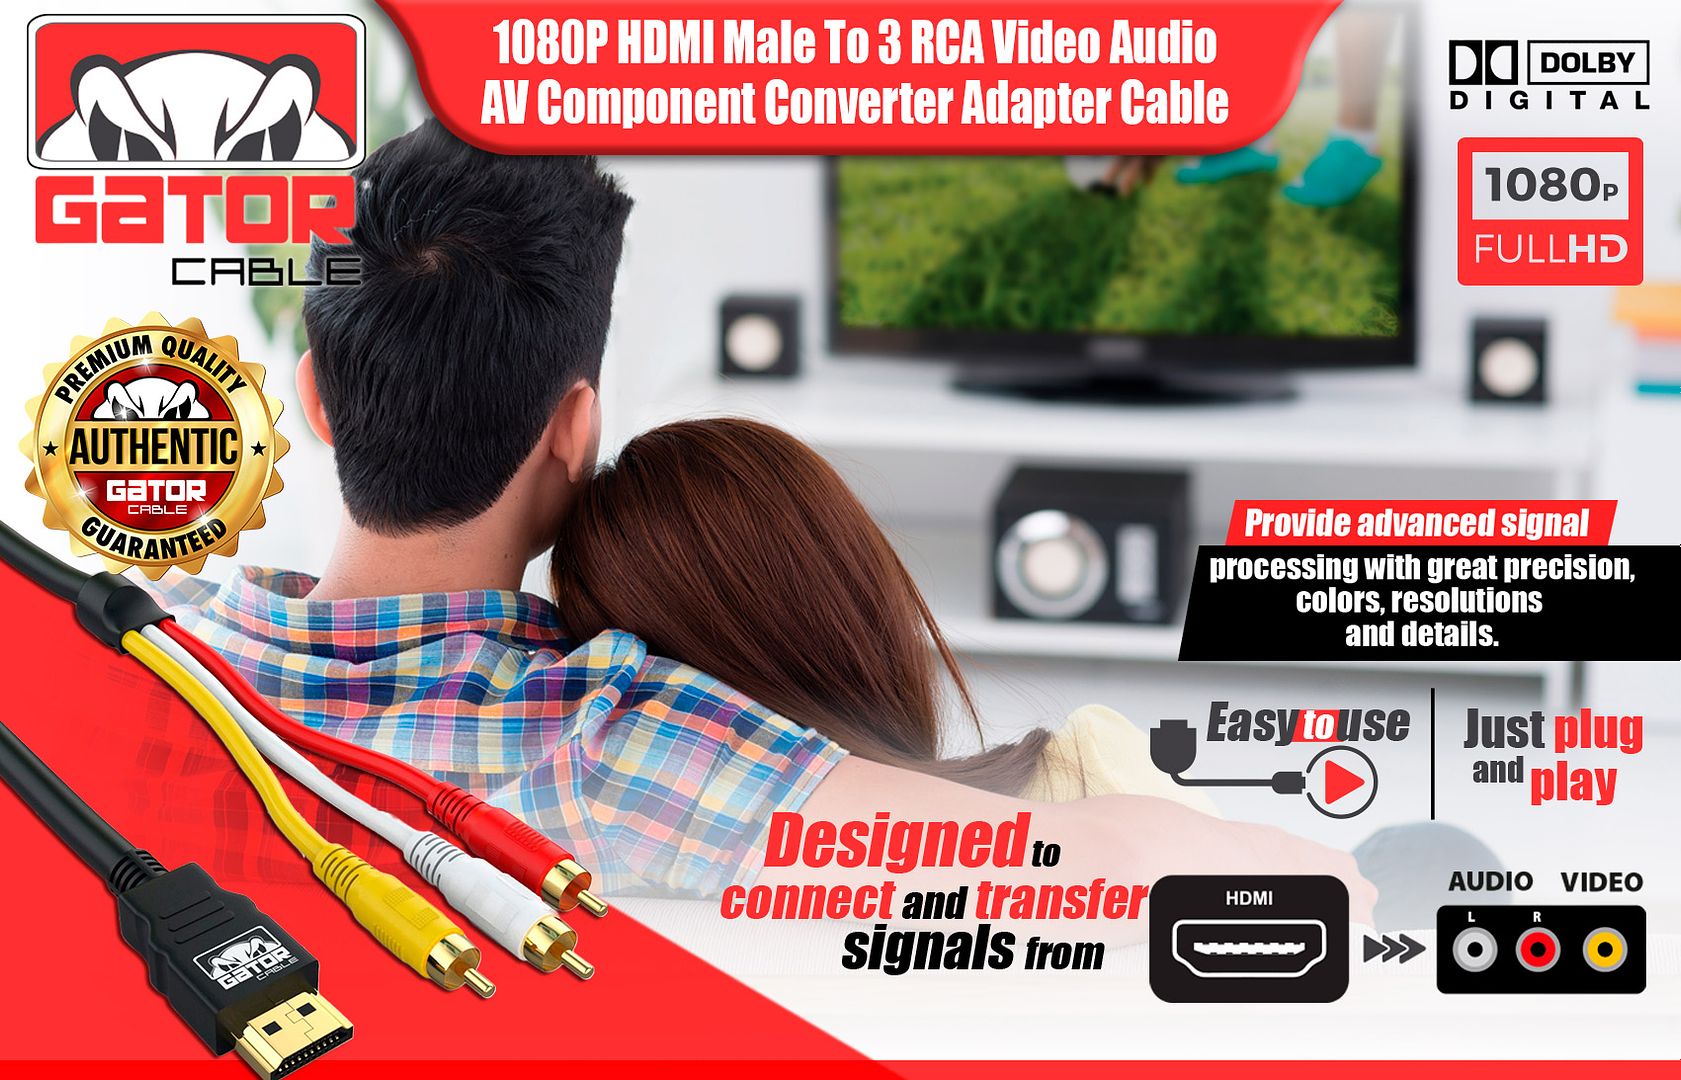 Banner-1080P-HDMI-Male-To-3-RCA-Video-Audio-AV-Component-Converter-Adapter-Cable